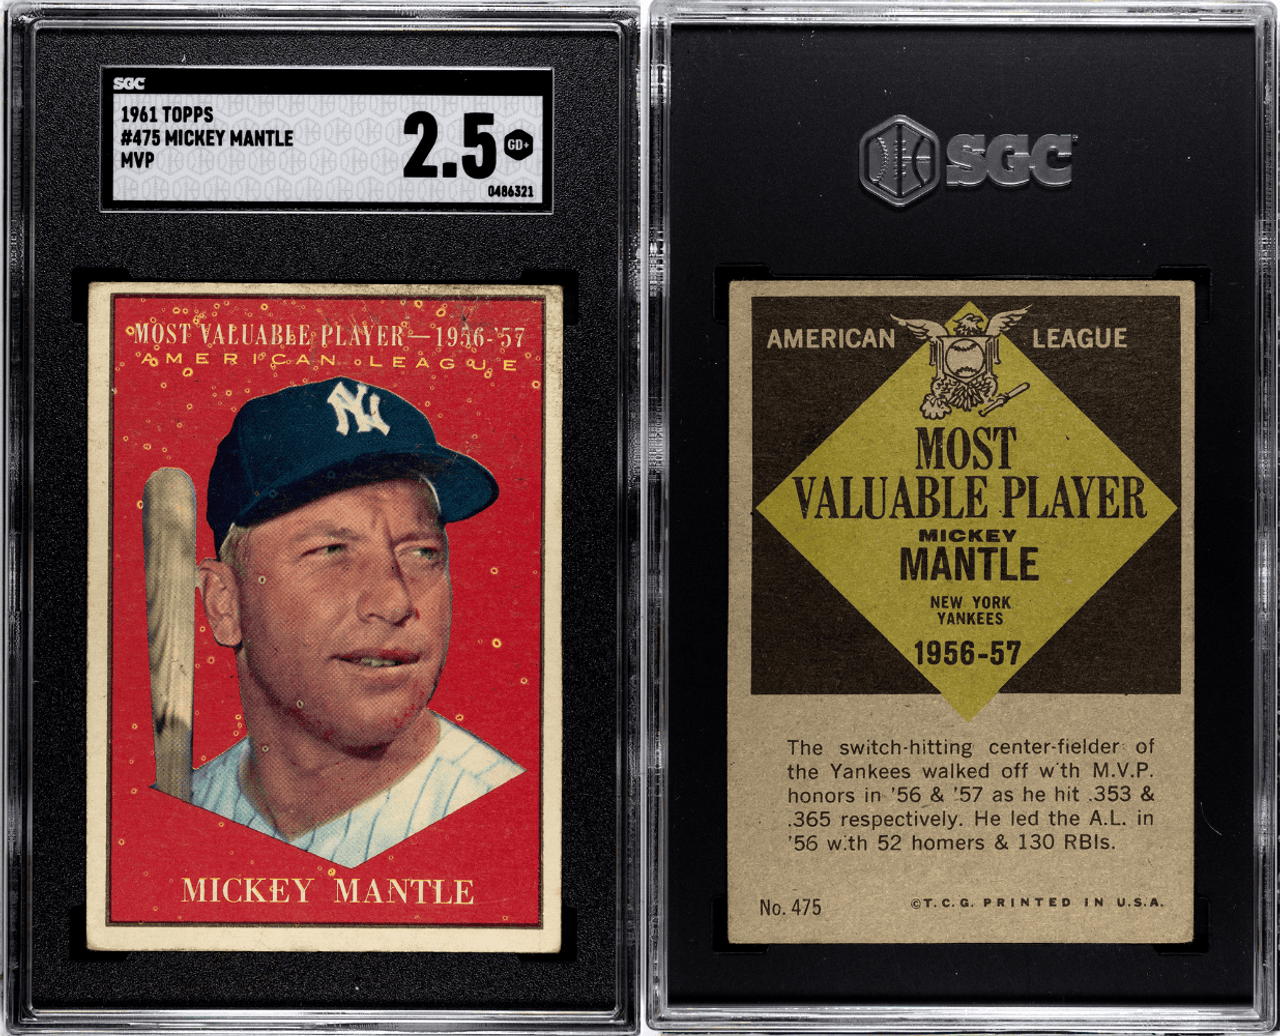 SGC 2.5 1961 Topps Mickey Mantle